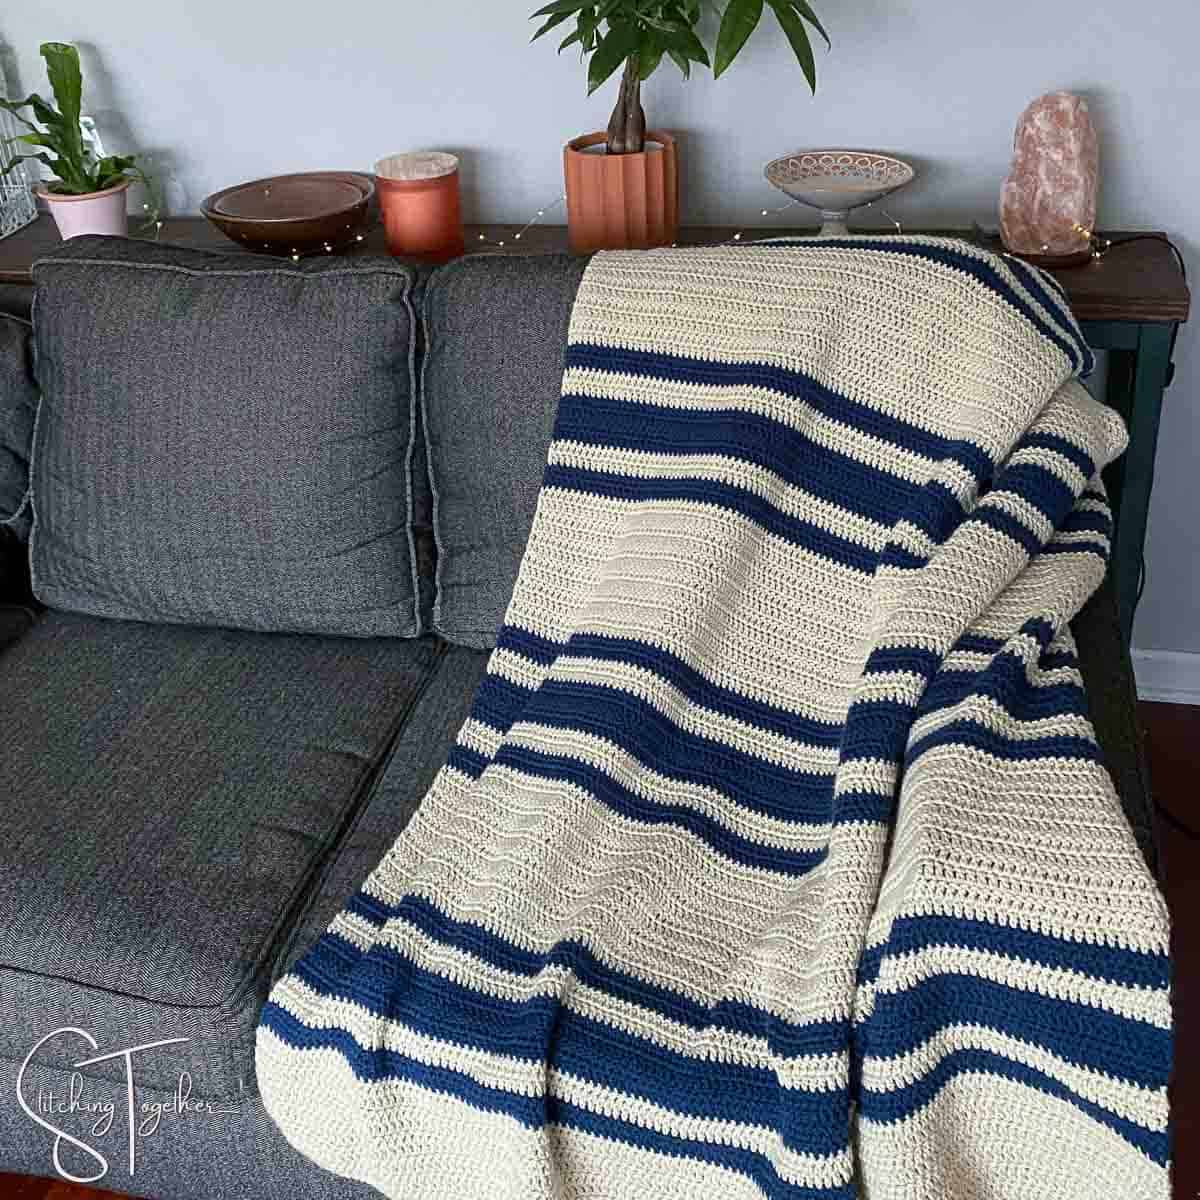 striped double crochet afghan draped on a couch